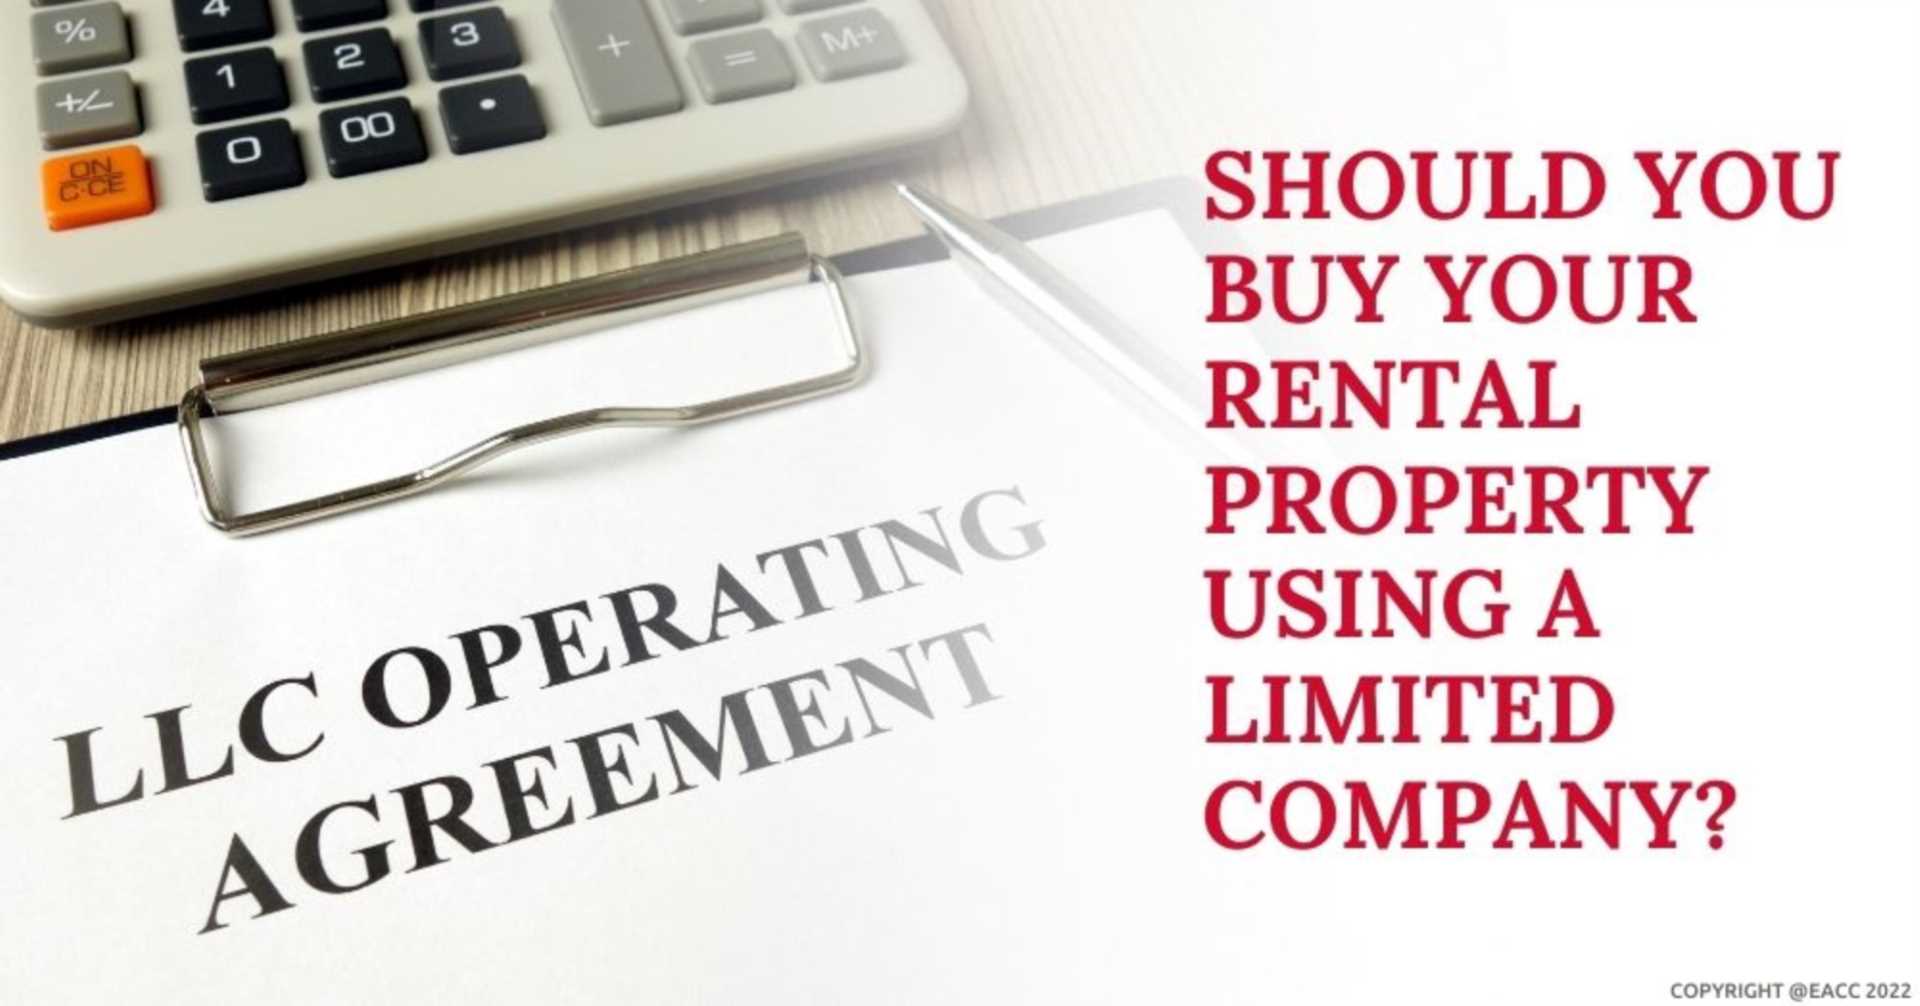 Should You Buy Your Rental Property Using a Limited Company?